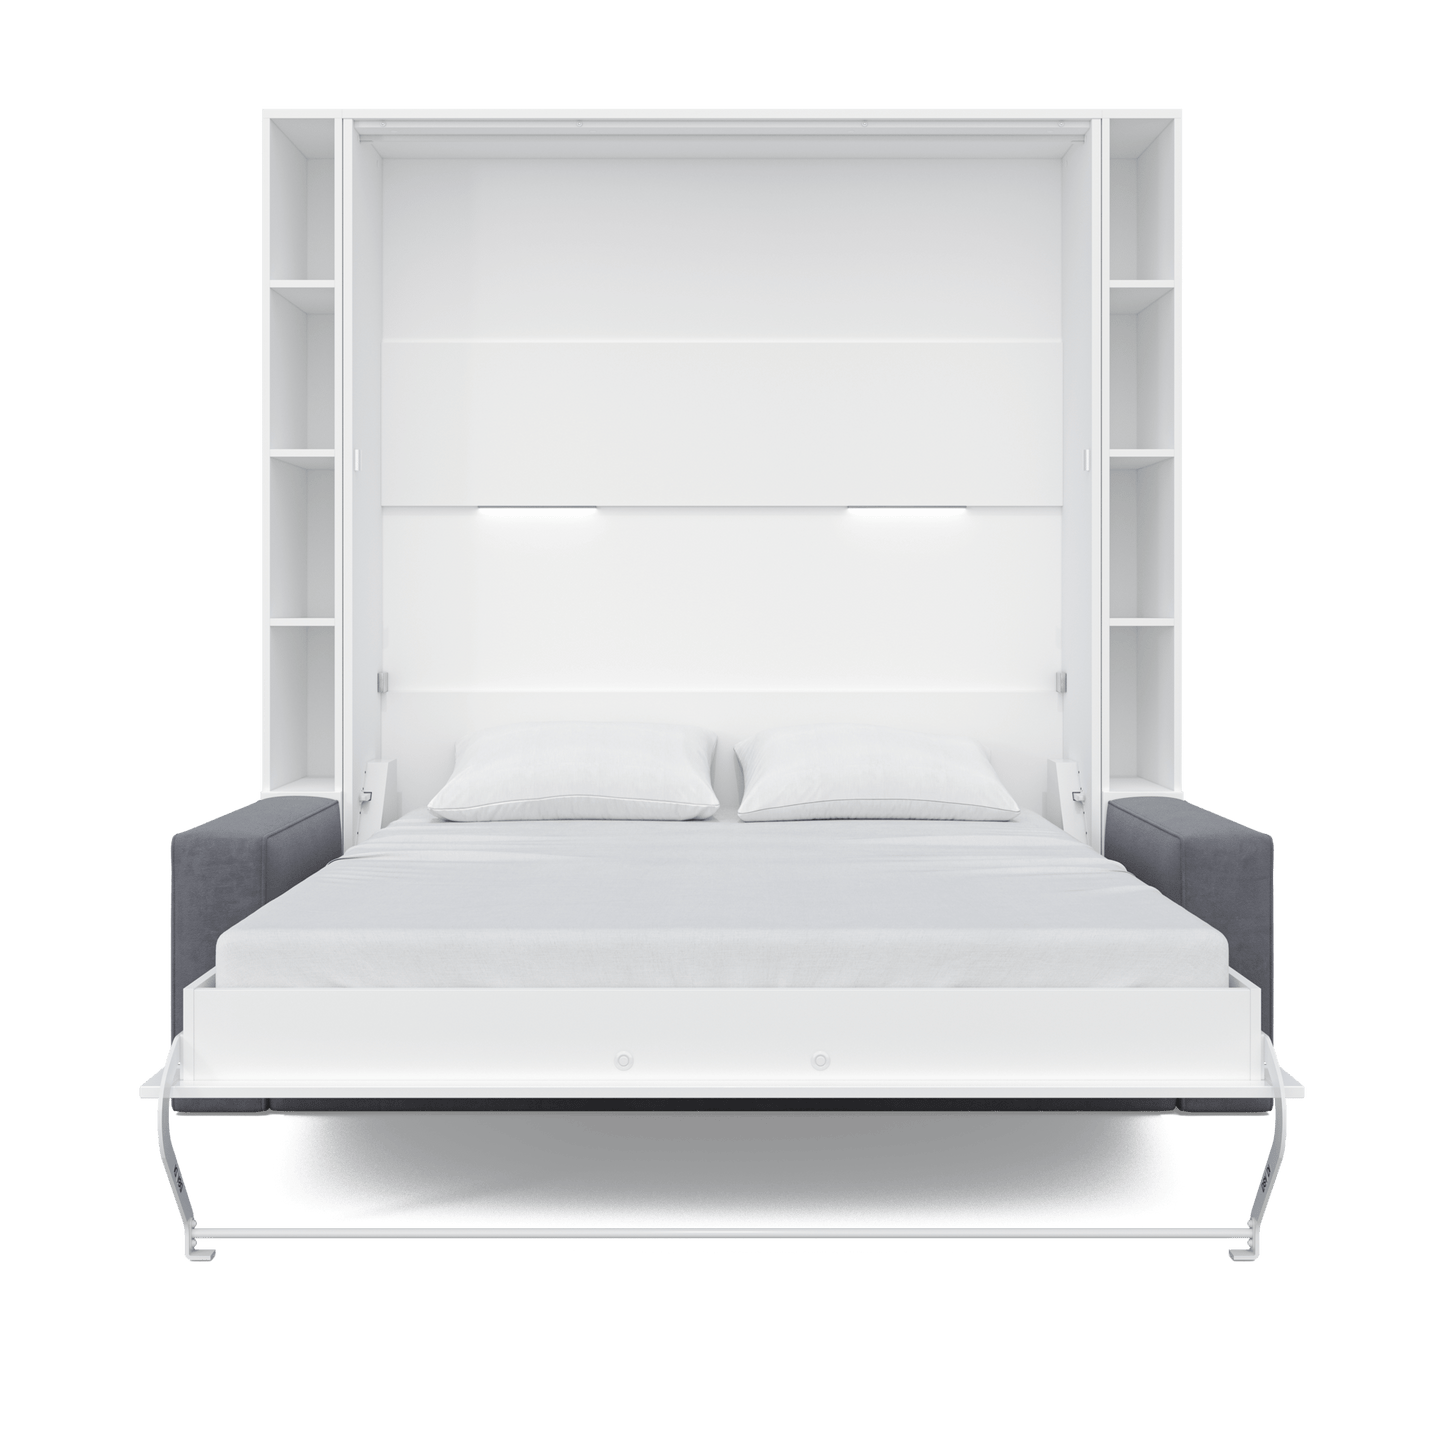 Maxima House Maxima House Vertical European Queen size Murphy Bed Invento with a Sofa and two Cabinets